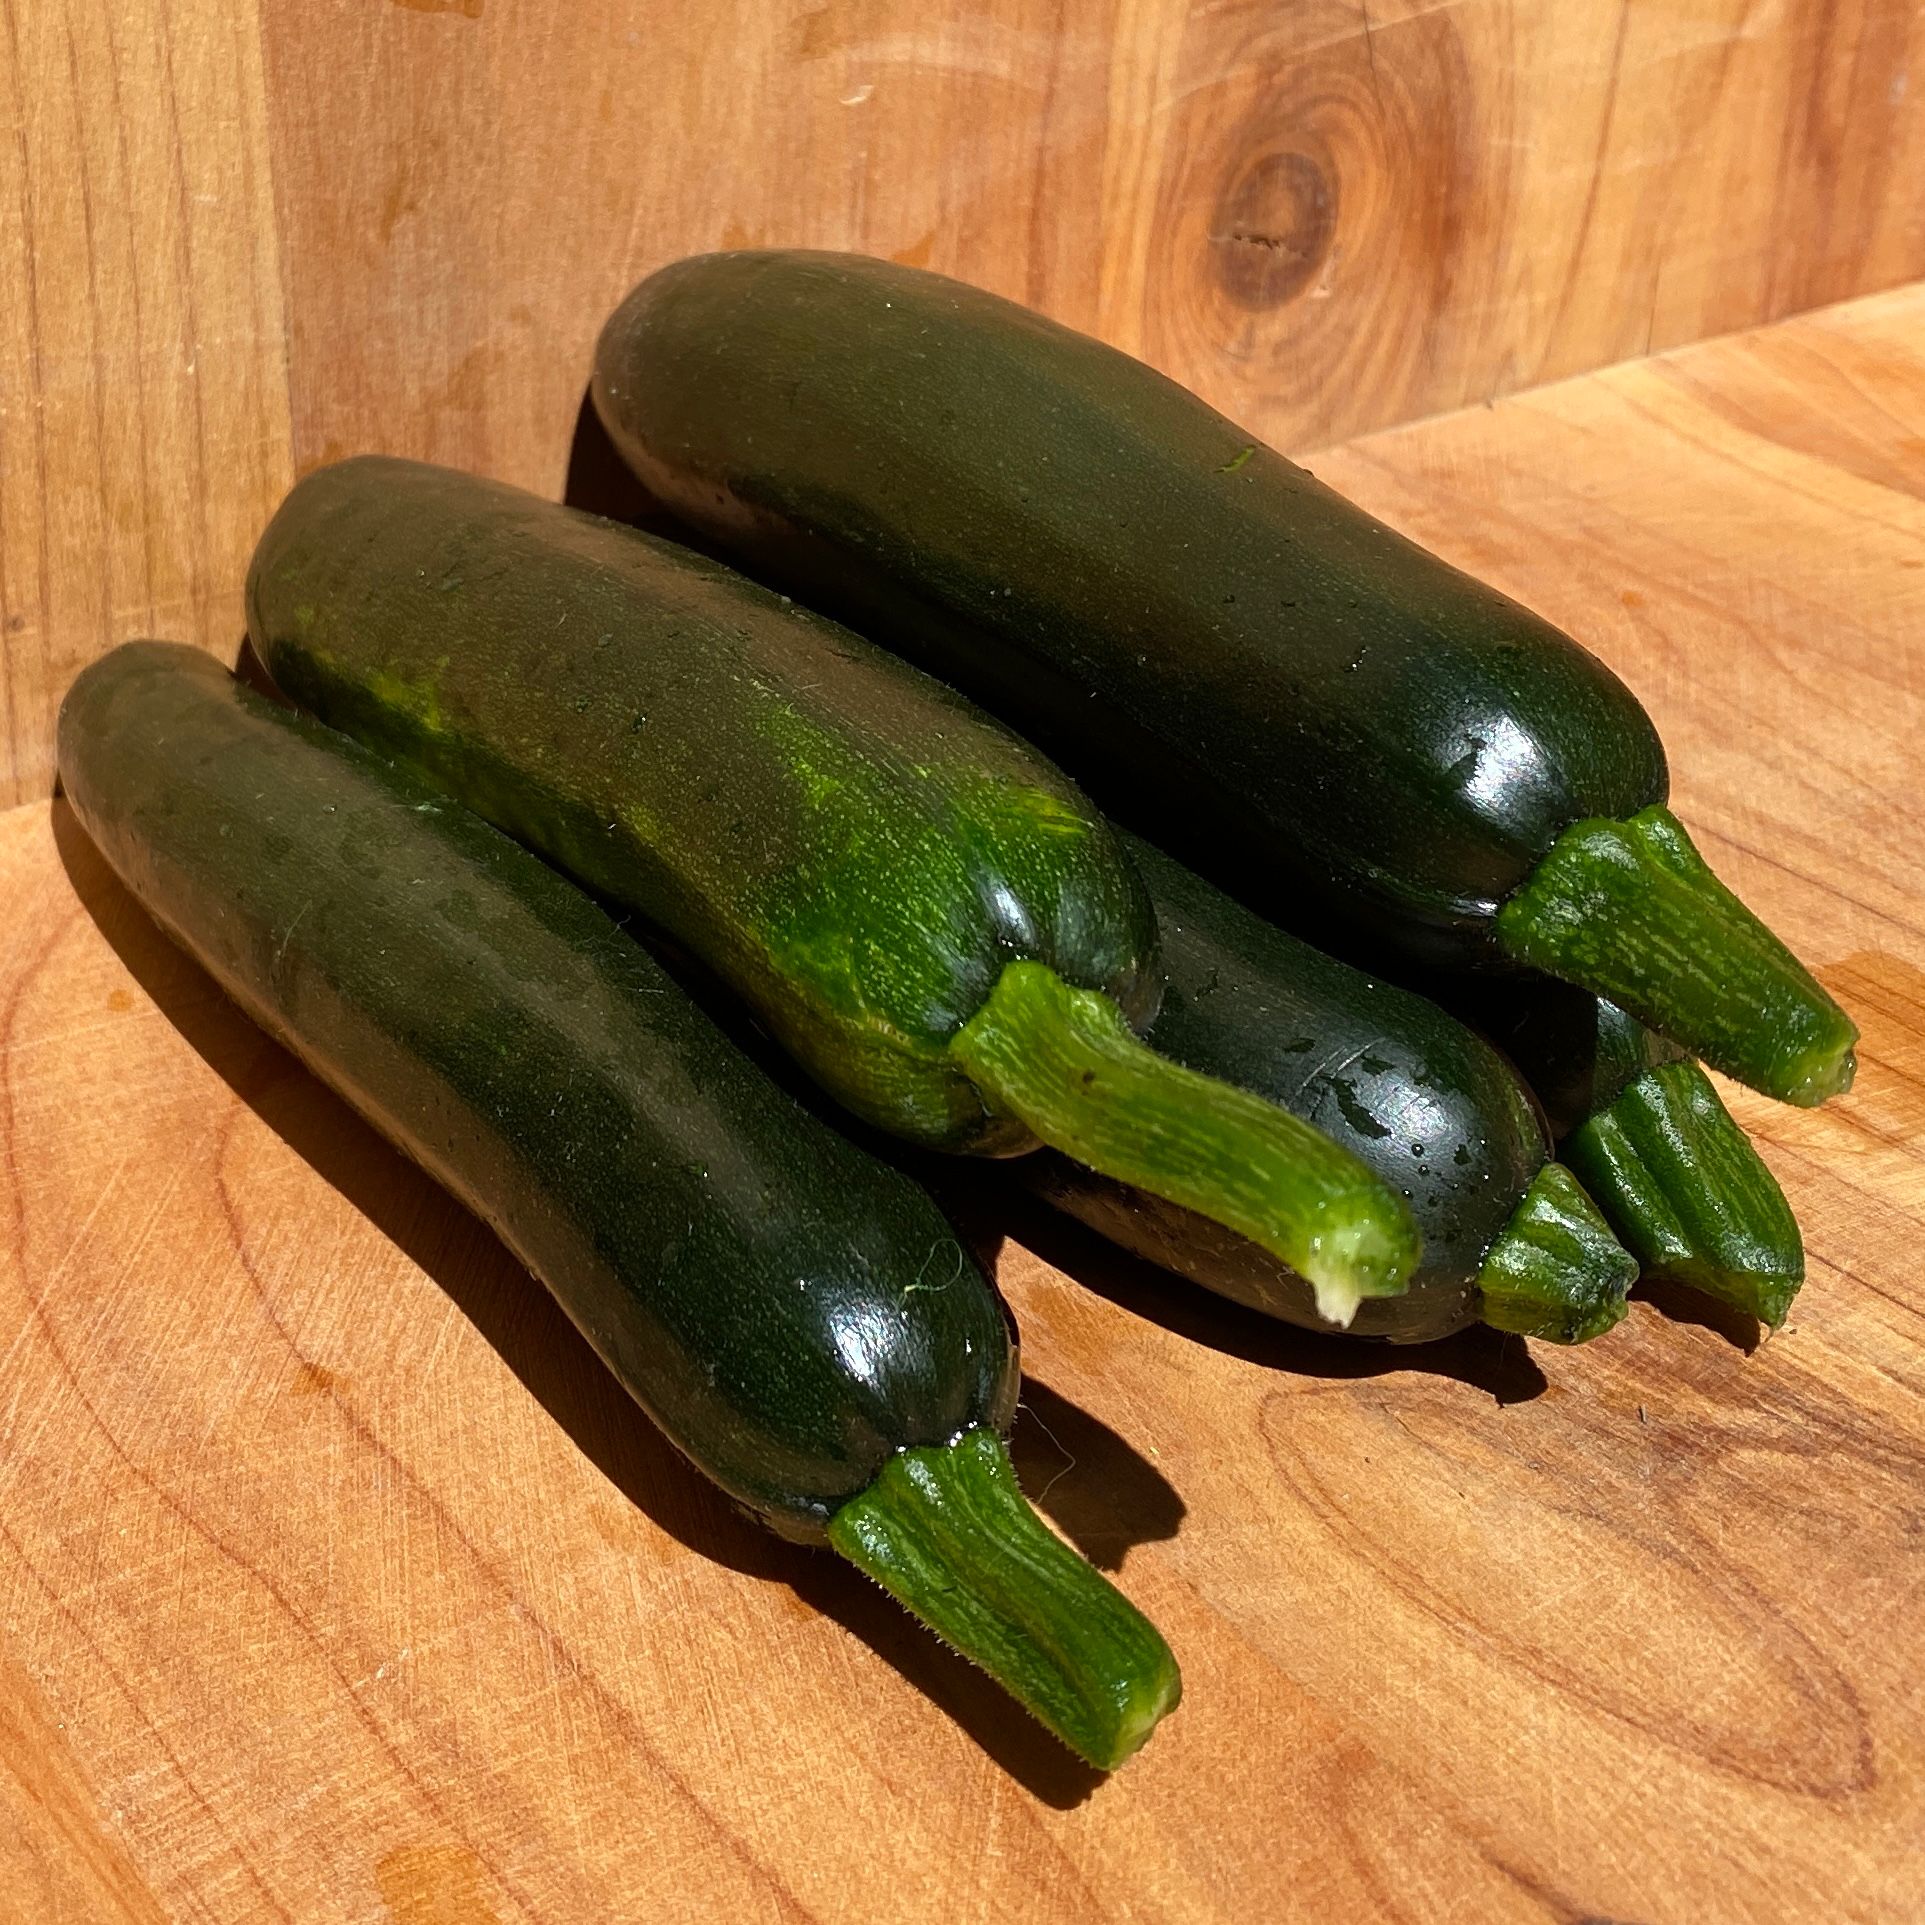 Courgettes x 3